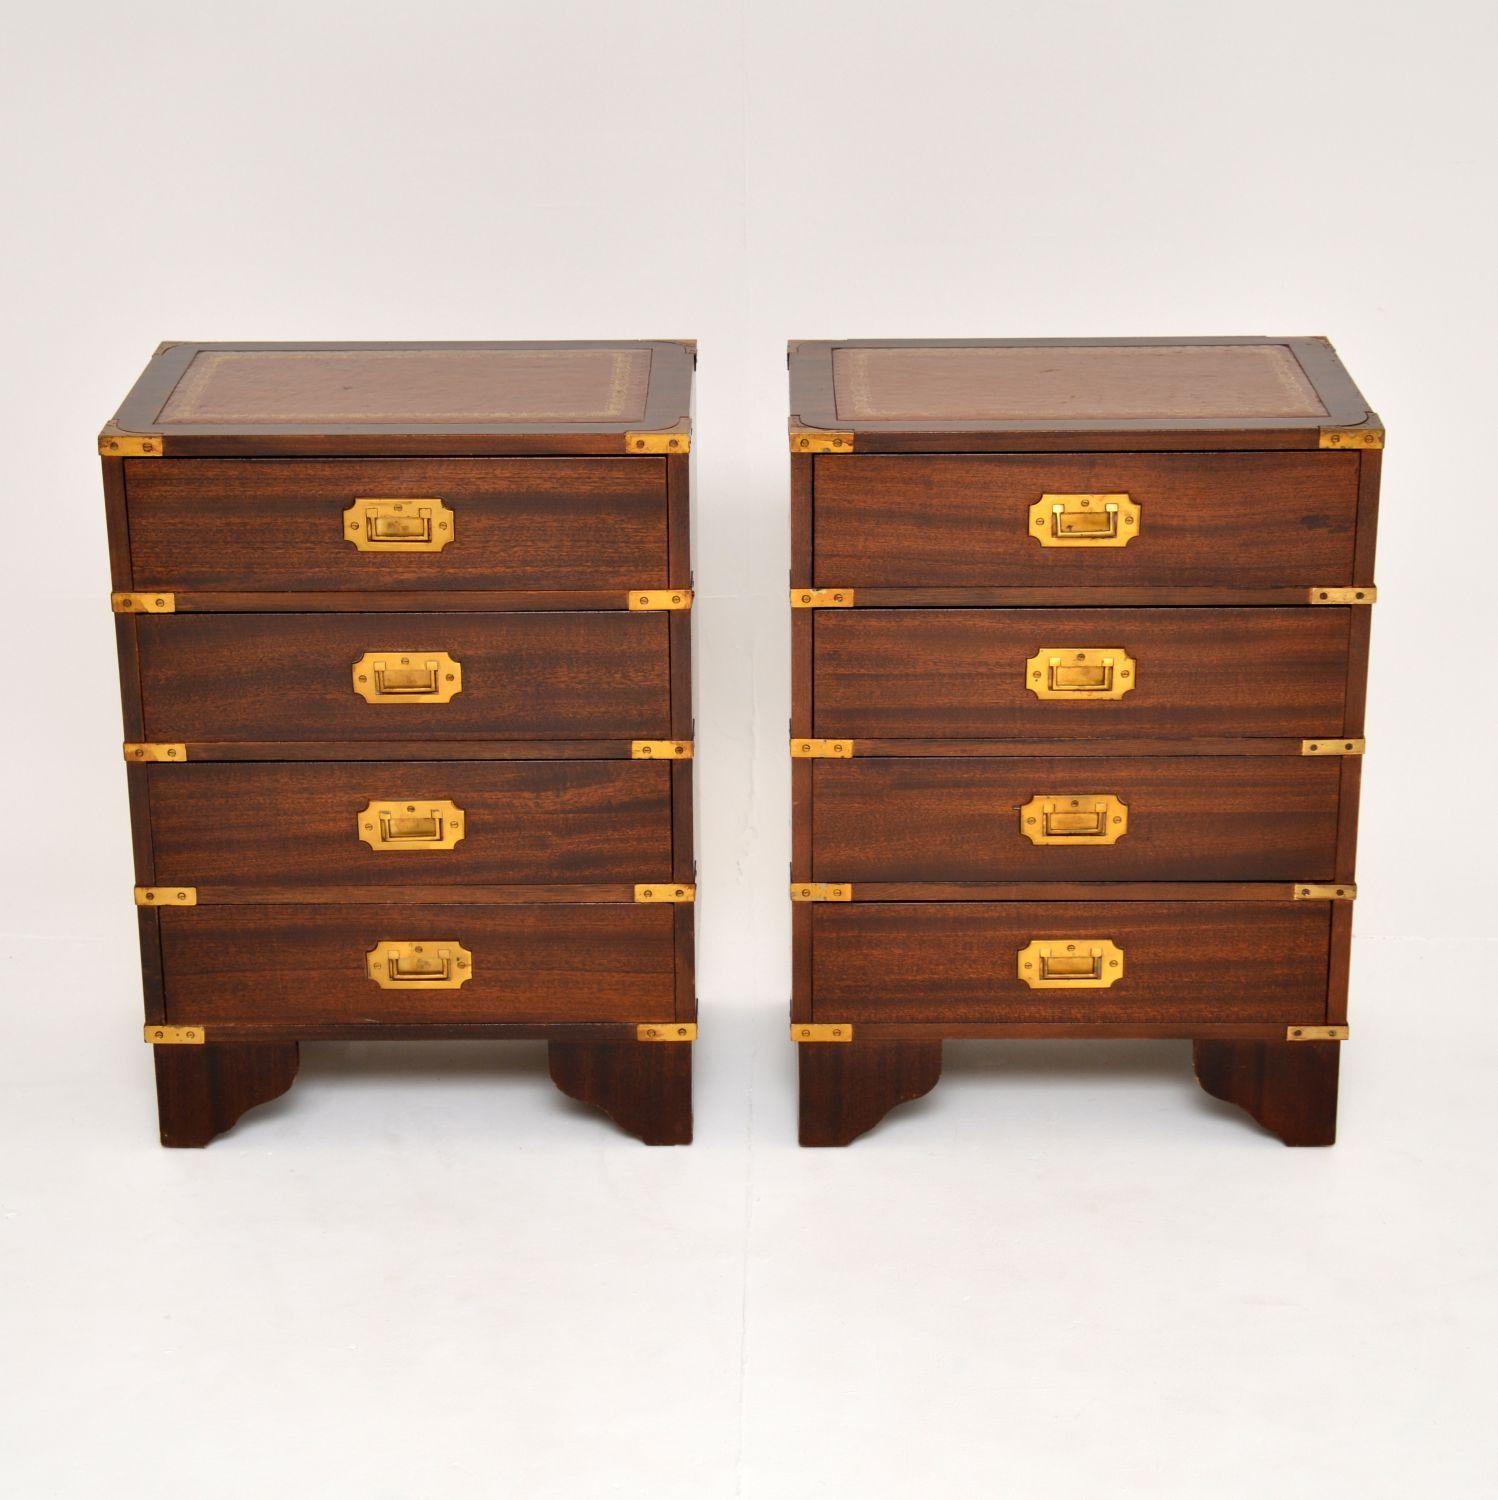 A lovely pair of bedside chests in the antique military style. These were made in England, they date from around the 1950’s.

They are well made and are a very useful size. There are fine quality brass fixtures and handles, each has an inset gold